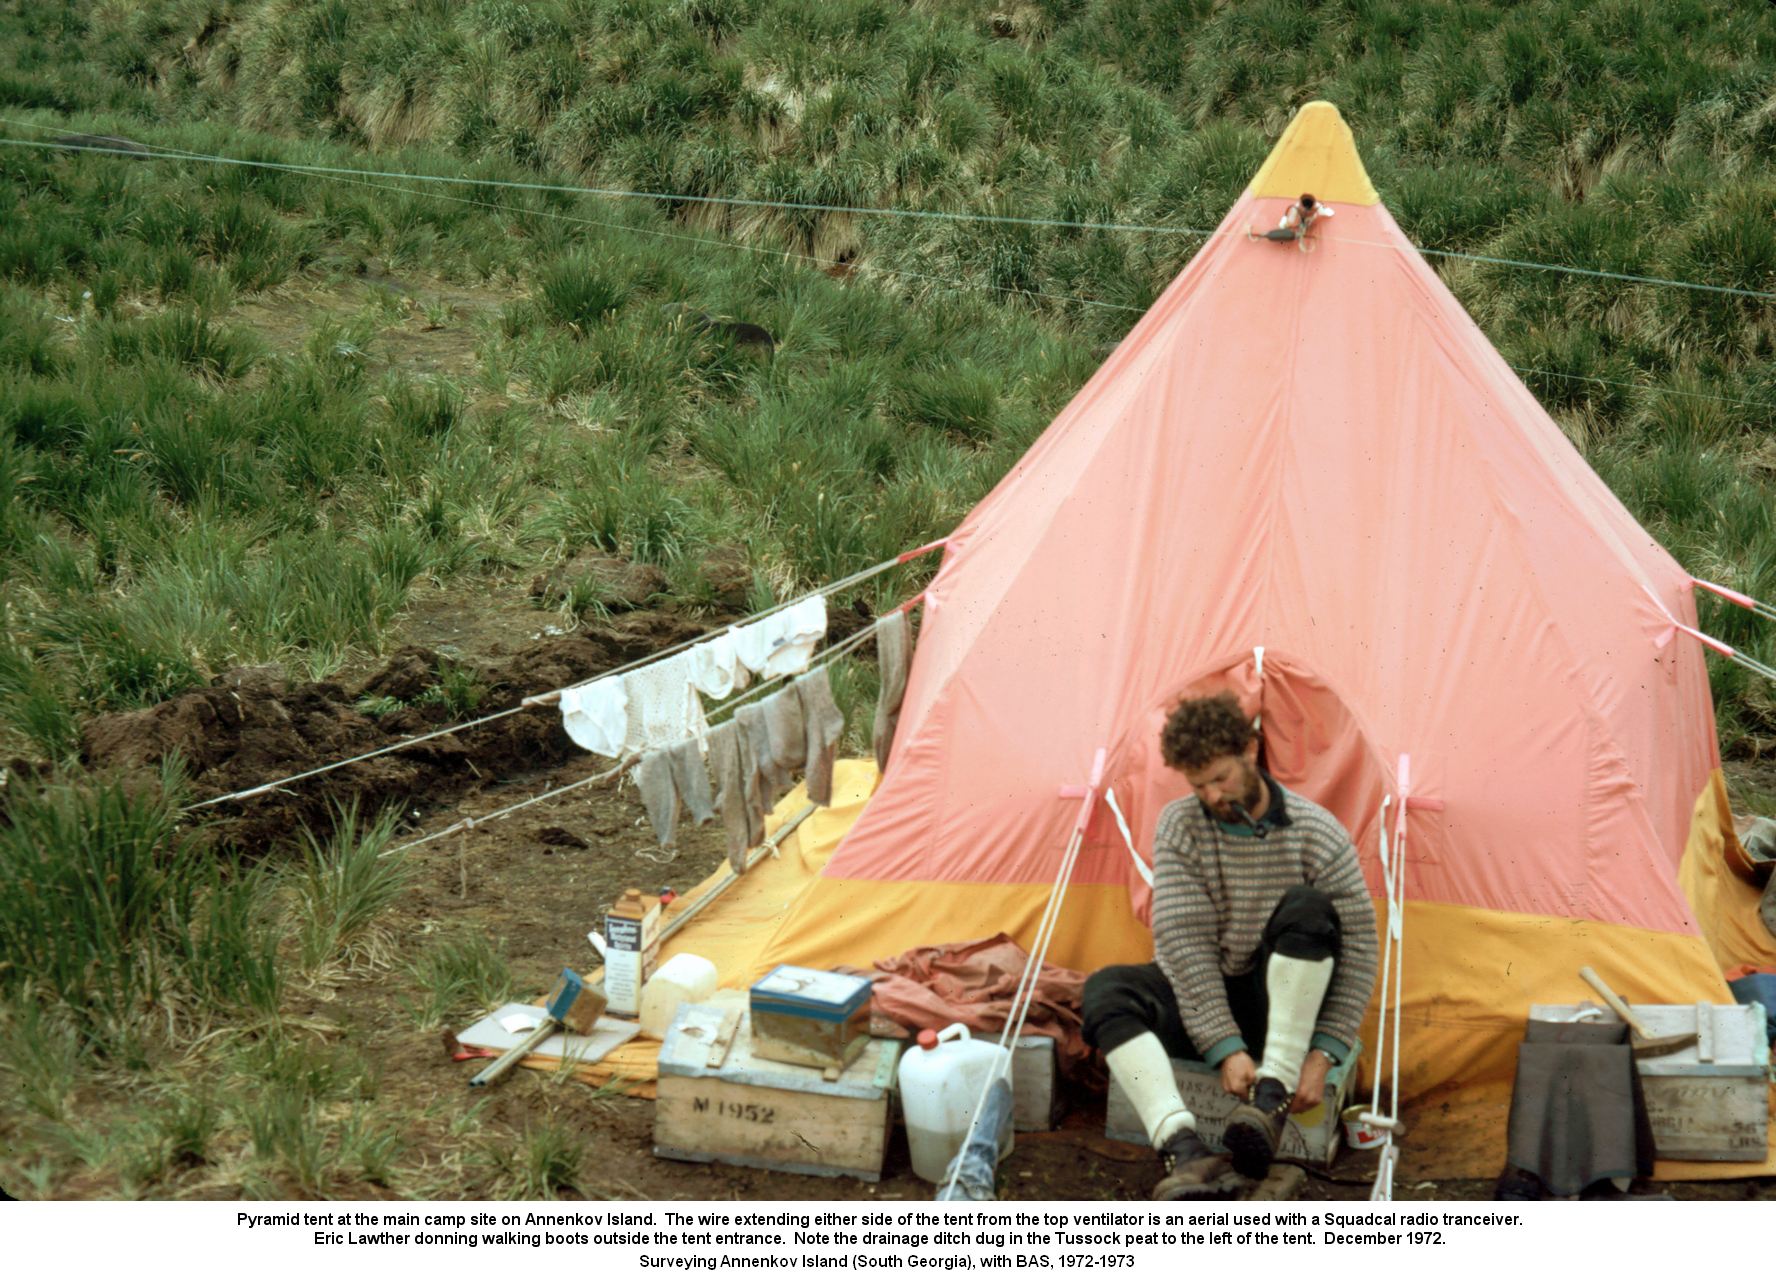 Pyramid tent at the main camp site on Annenkov Island.  The wire extending either side of the tent from the top ventilator is an aerial used with a Squadcal radio tranceiver. Eric Lawther donning walking boots outside the tent entrance.  Note the drainage ditch dug in the Tussock peat to the left of the tent, December 1972.